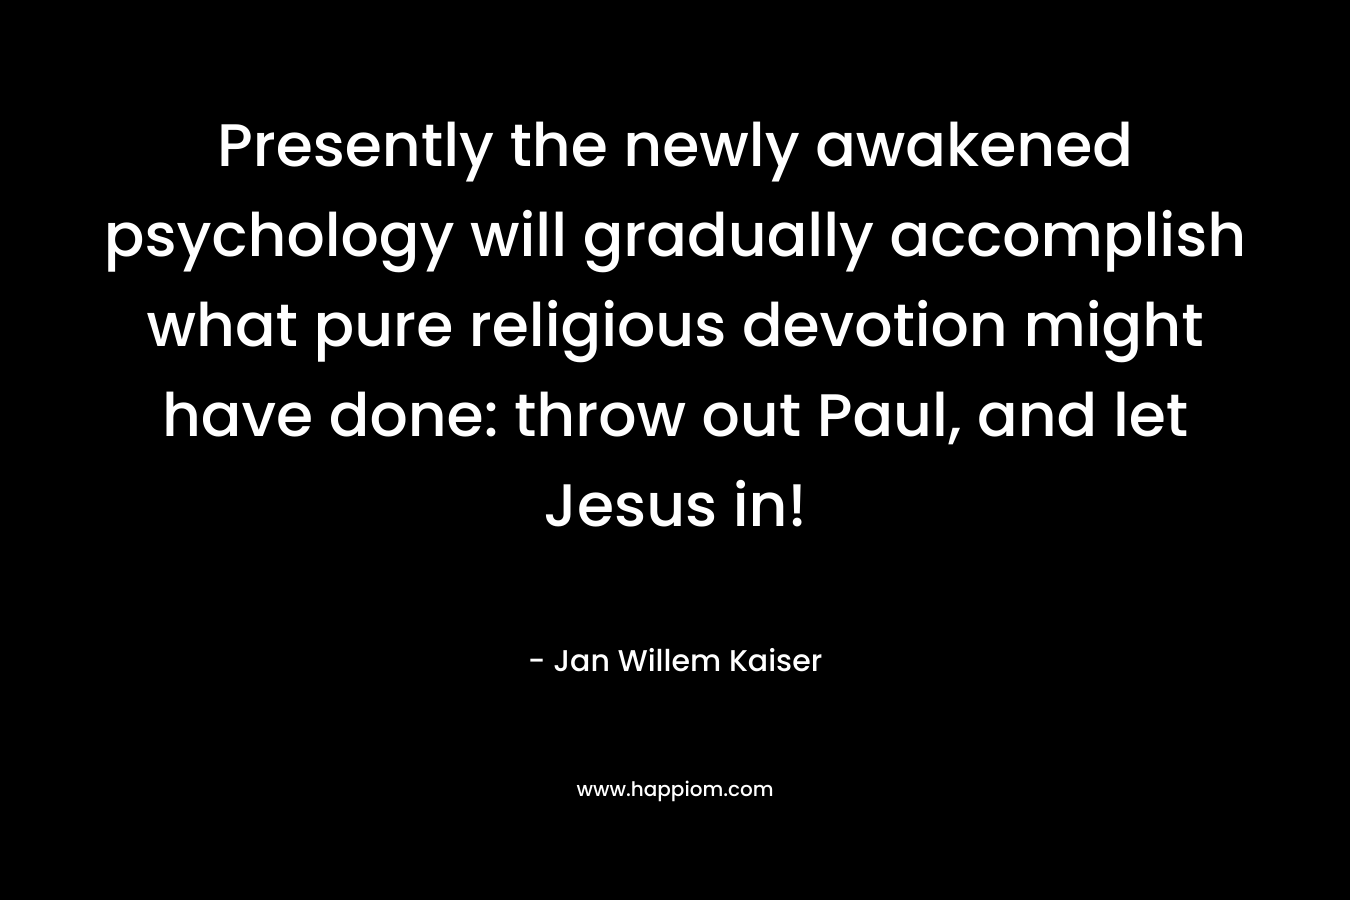 Presently the newly awakened psychology will gradually accomplish what pure religious devotion might have done: throw out Paul, and let Jesus in!